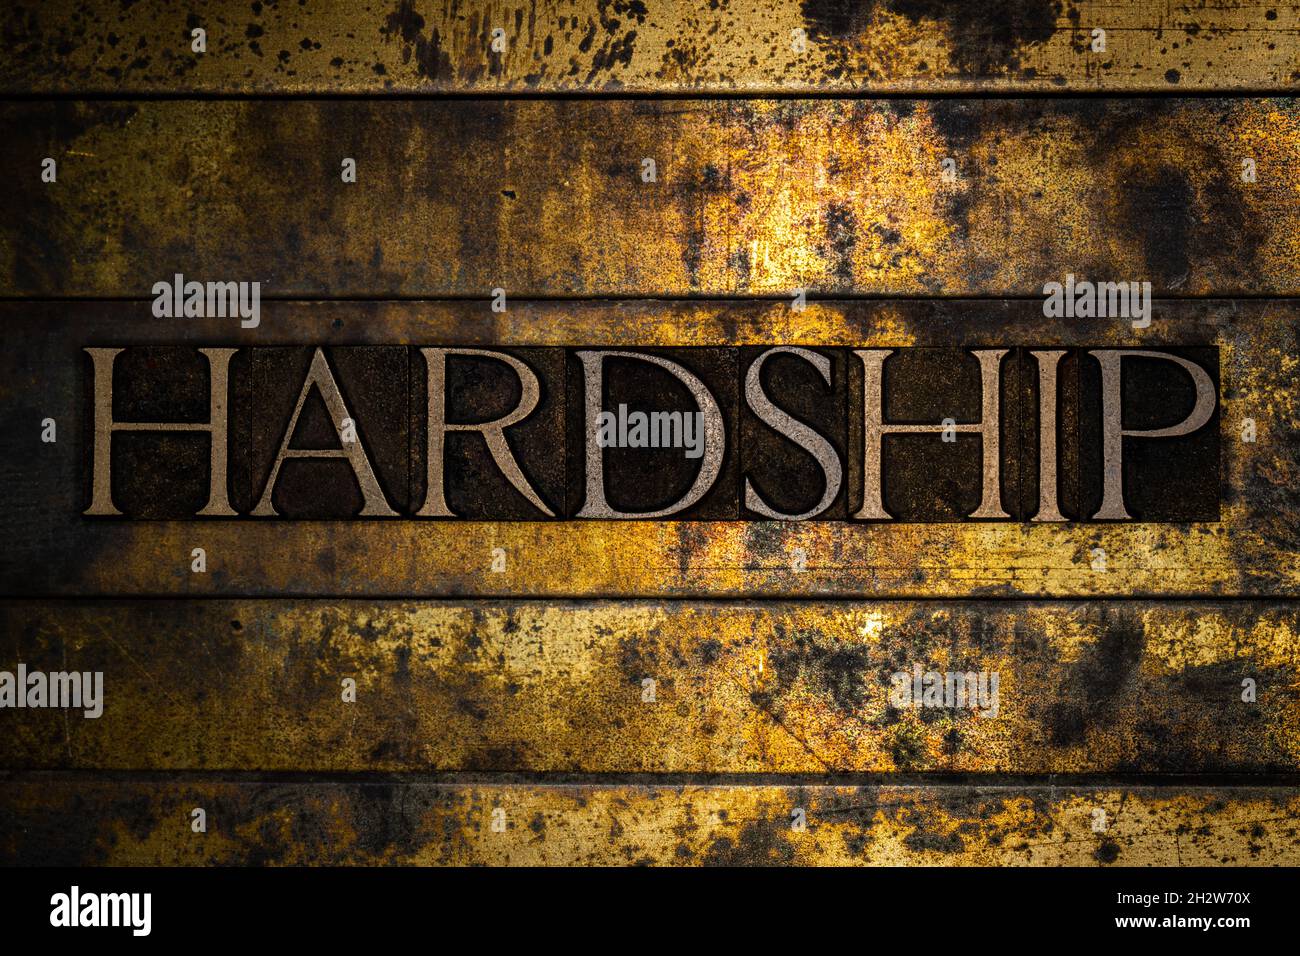 Hardship text on textured grunge copper and vintage gold background Stock Photo